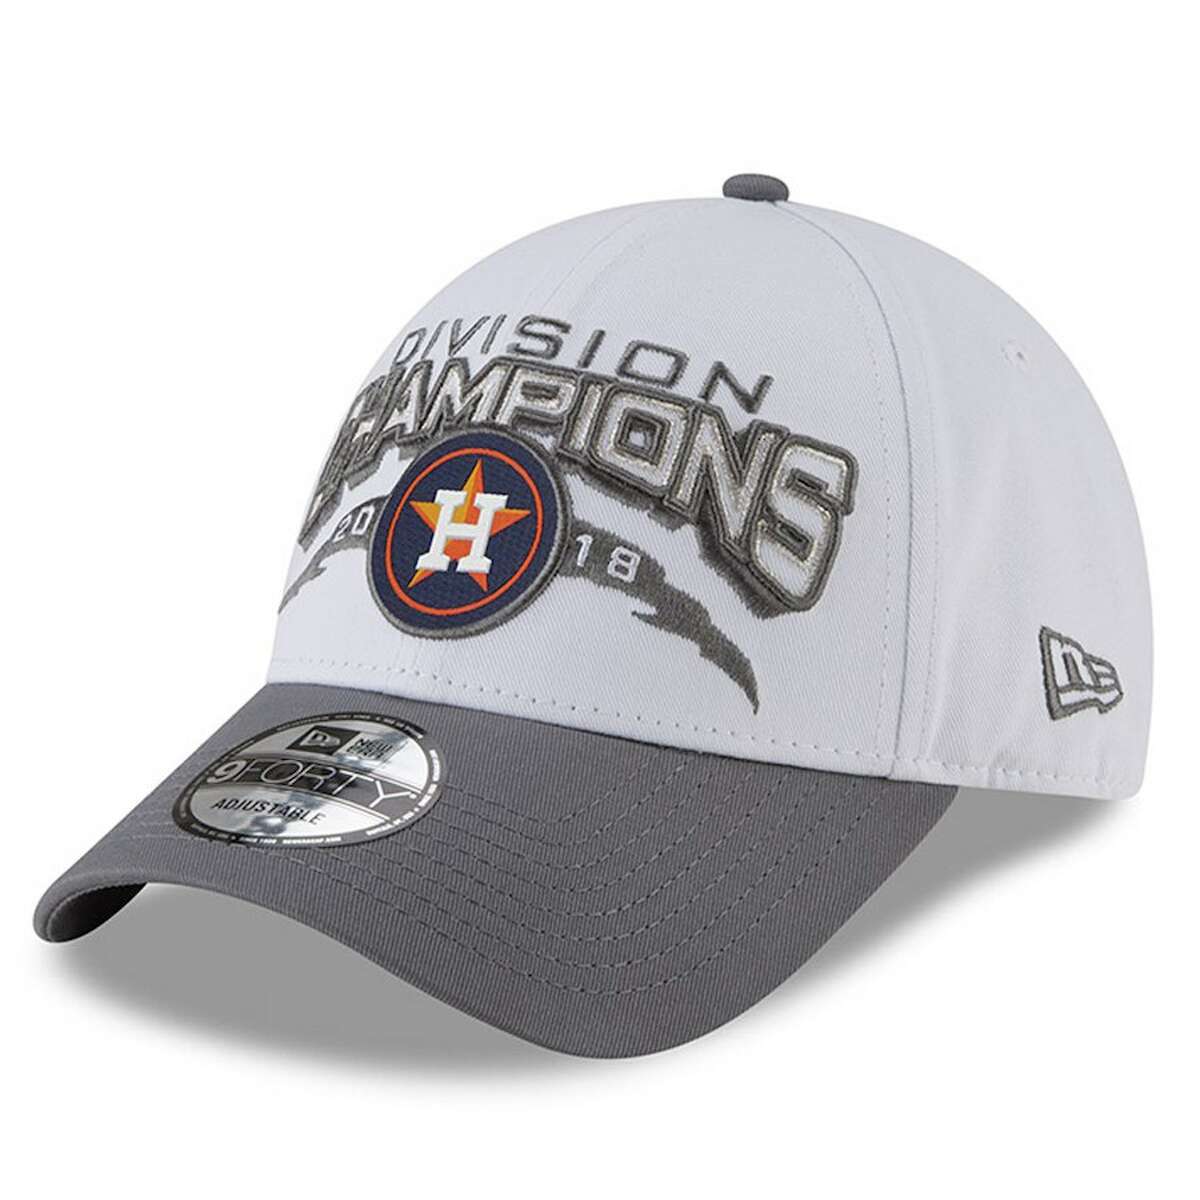 Defend H-Town: Where to buy your Houston Astros AL West